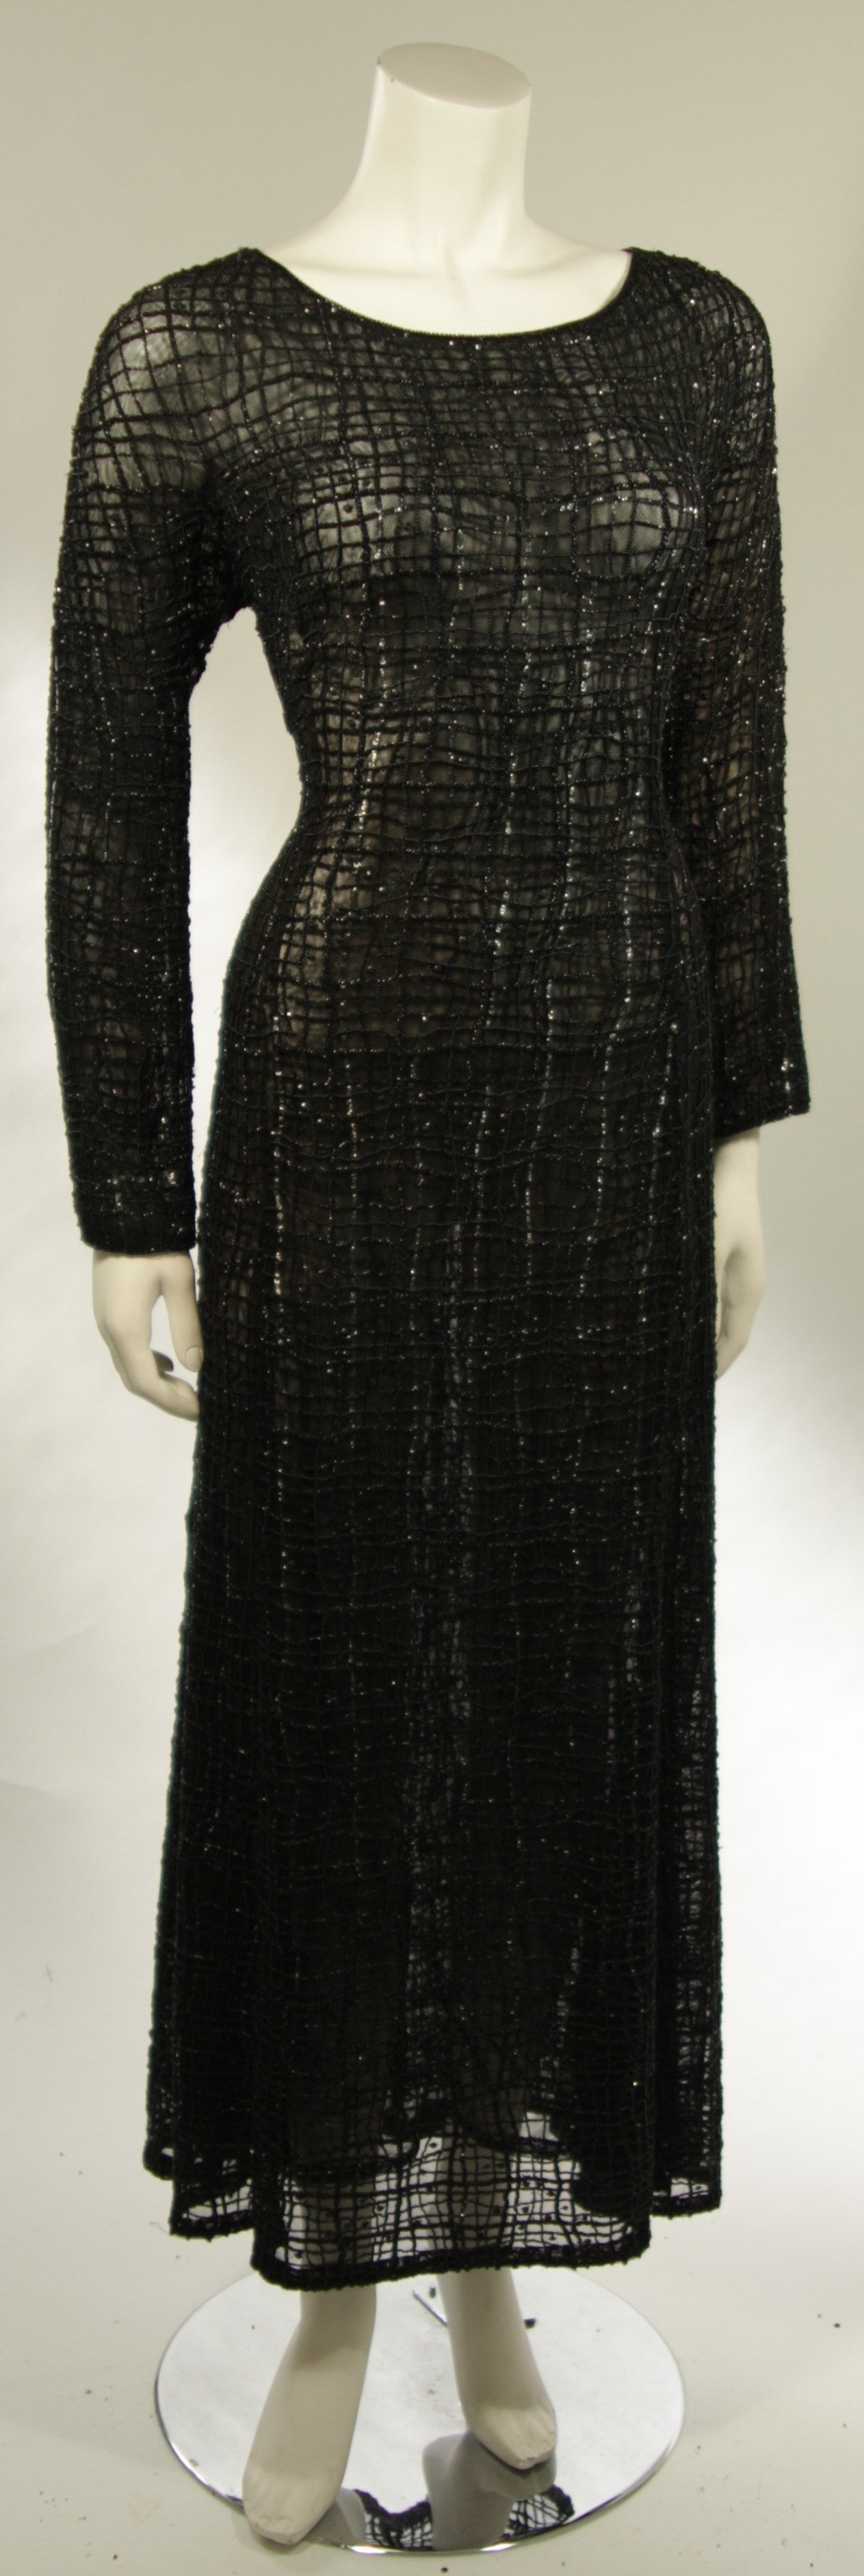 This Giorgio Armani gown is composed of a sheer black fabric with slight stretch topped with beading. Made in Italy. 

Measures (Approximately)
Size 44
Length: 52.5